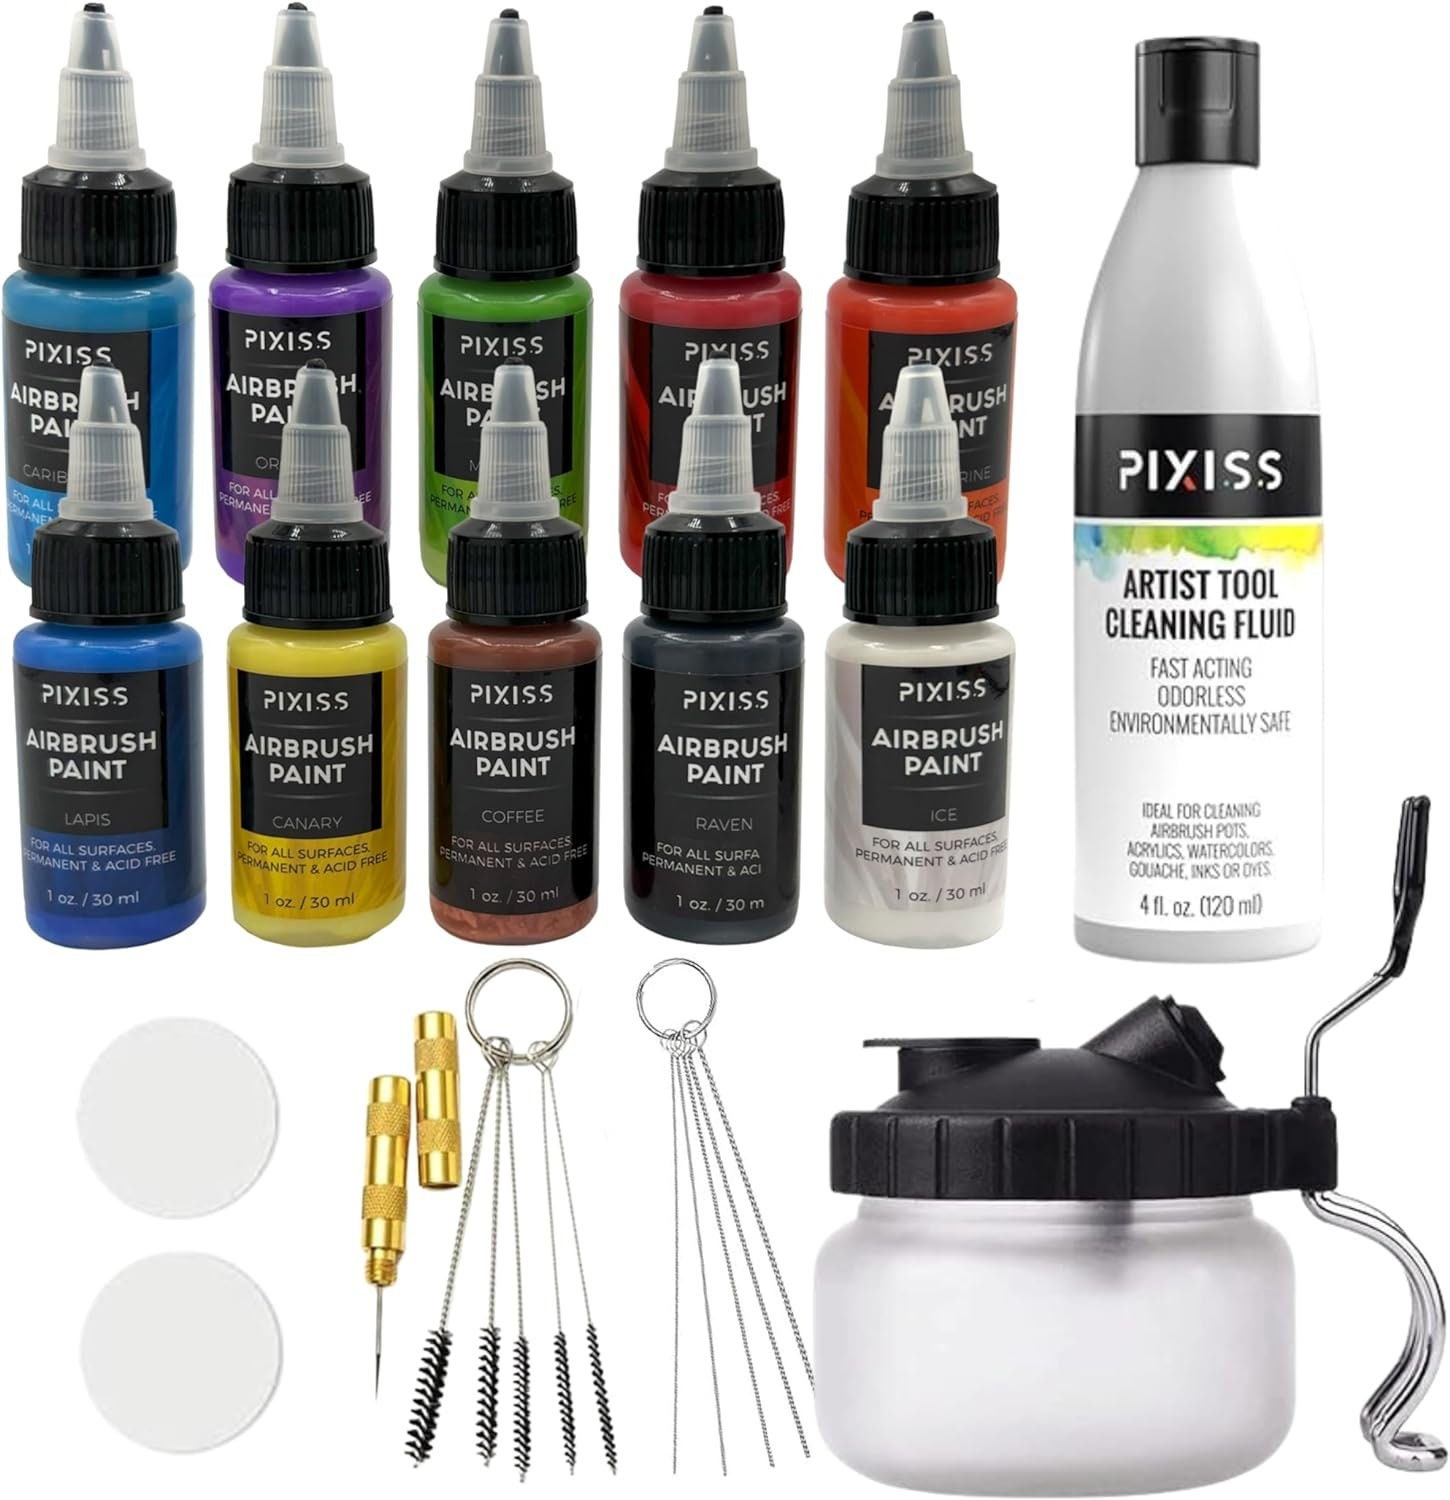 Acrylic Airbrush Paint 24 Colors (30 ml/1 oz) Basic Colors with Color Wheel